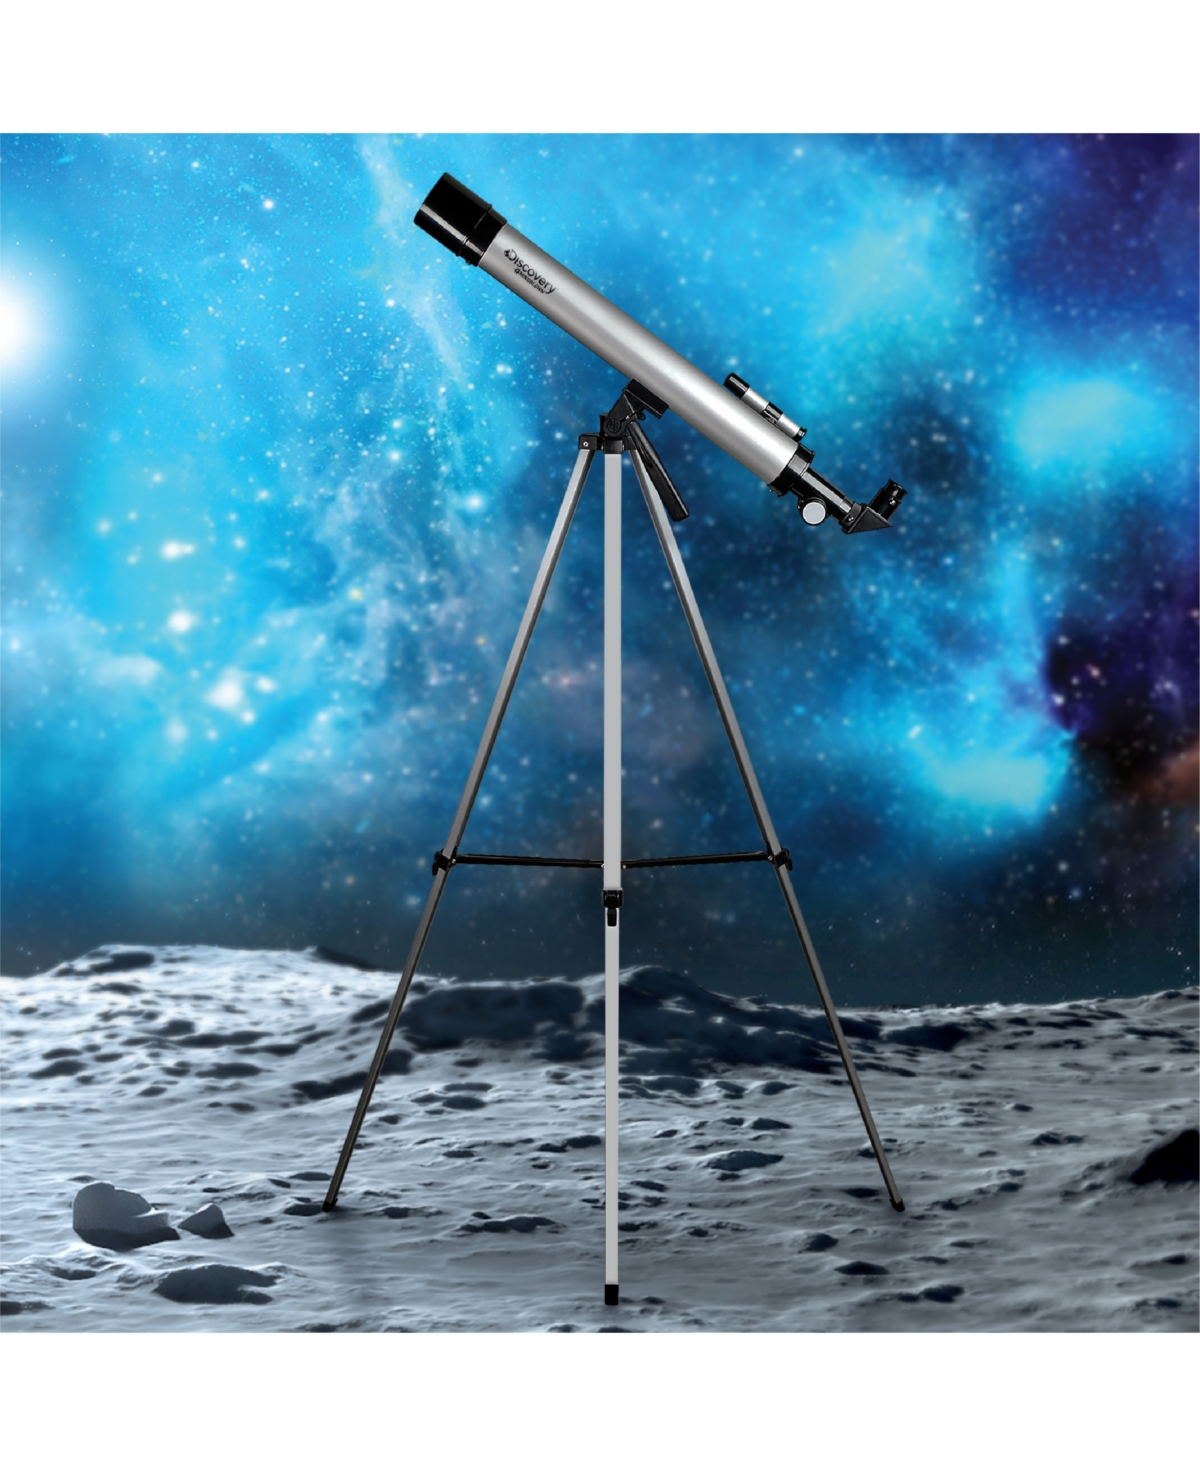 Shop Discovery Mindblown Telescope With Tripod, 50x And 100x Lenses In Silver